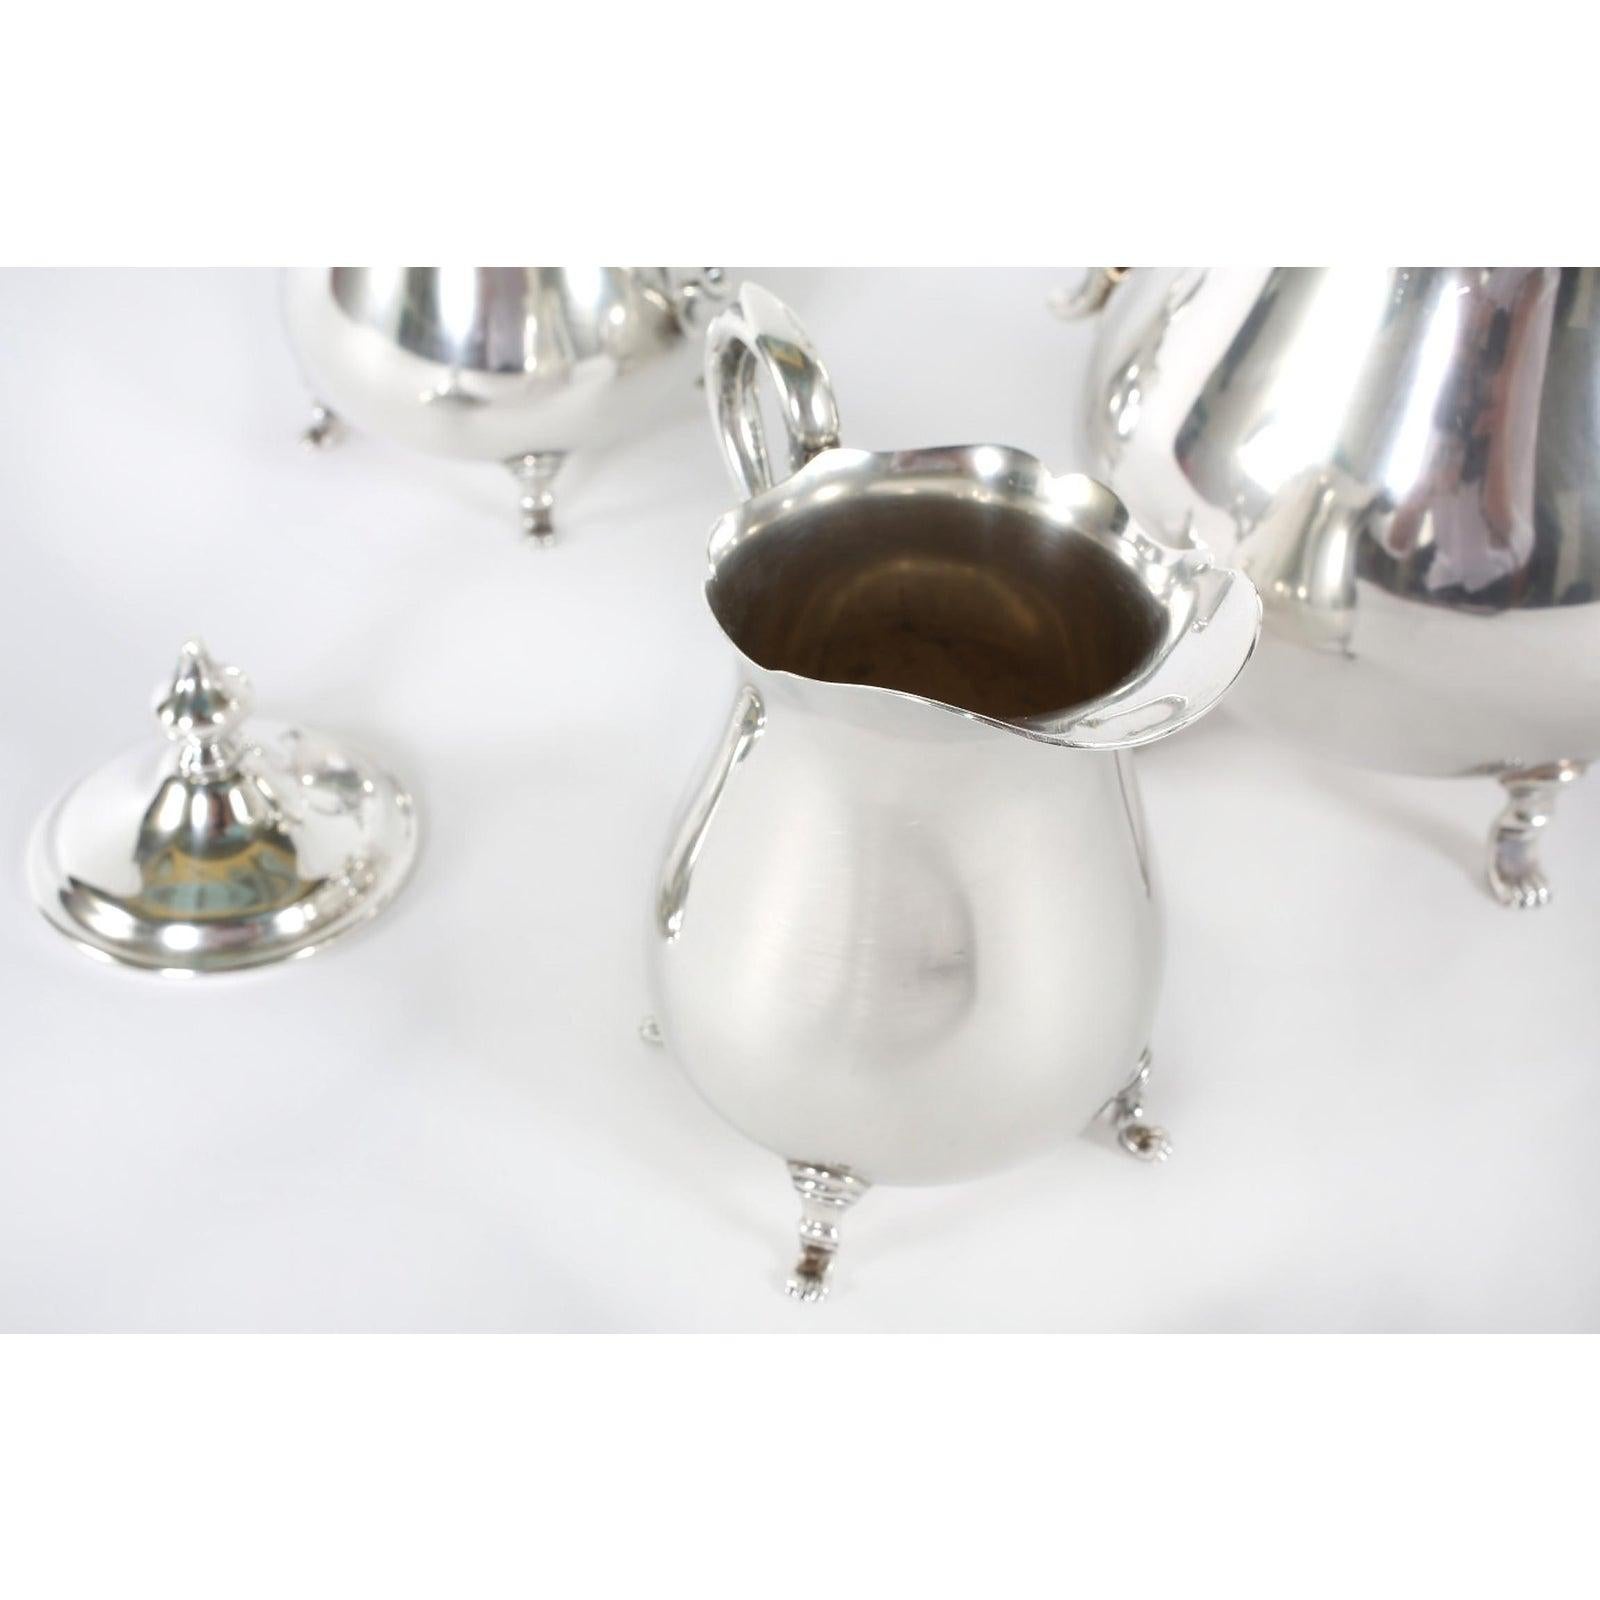 20th Century Cartier Sterling Silver Tea / Coffee Service, Set of 3